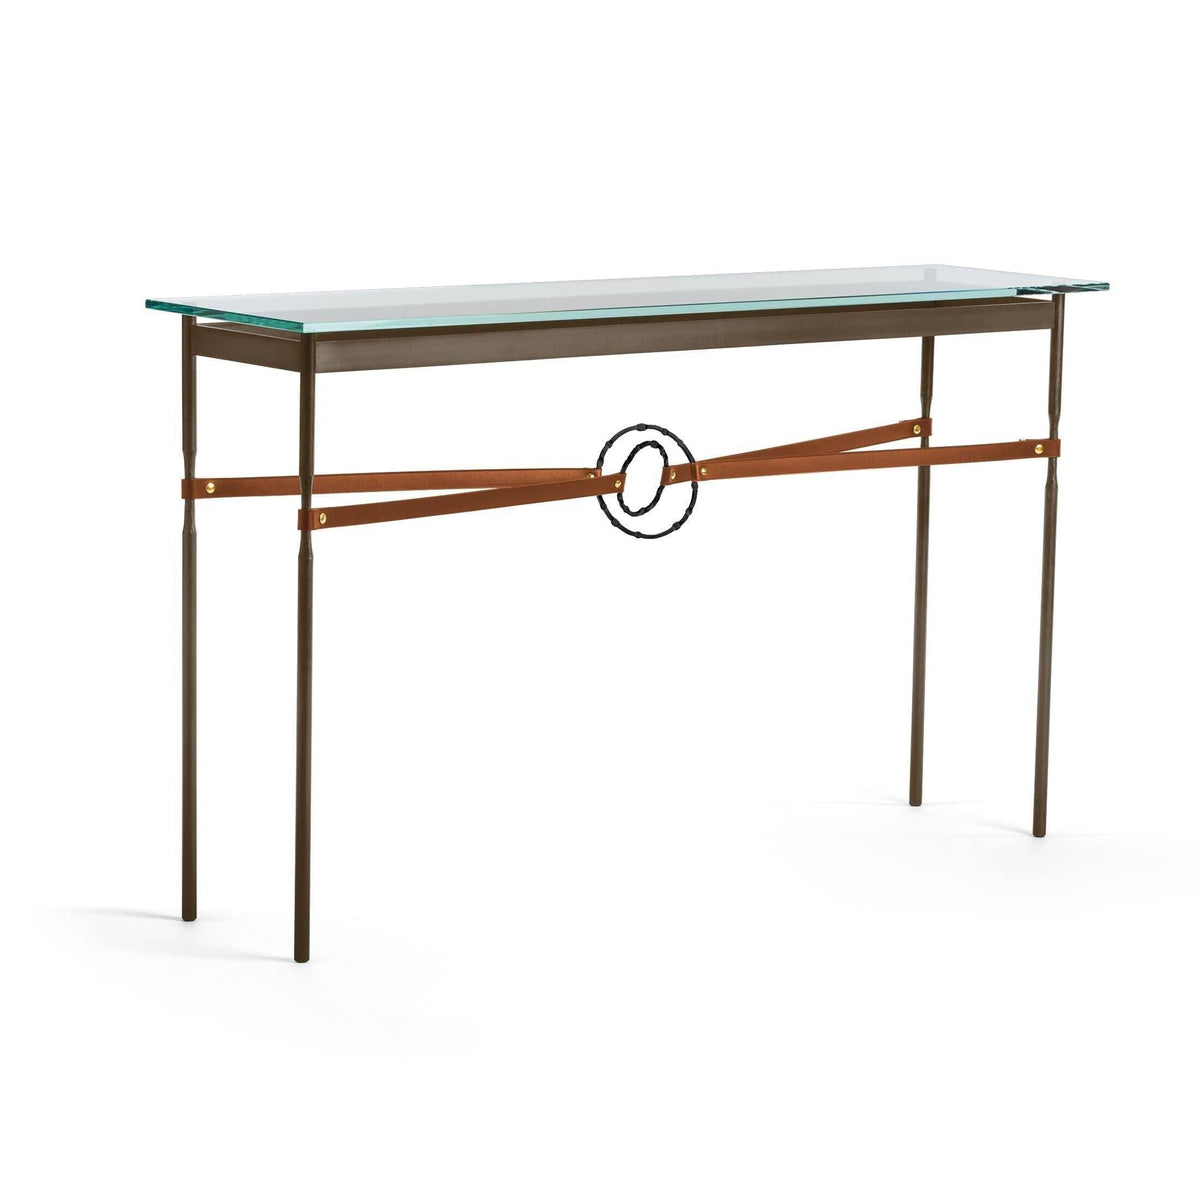 Hubbardton Forge - Equus Chestnut Leather Console Table - 750118-05-10-LC-VA0714 | Montreal Lighting & Hardware